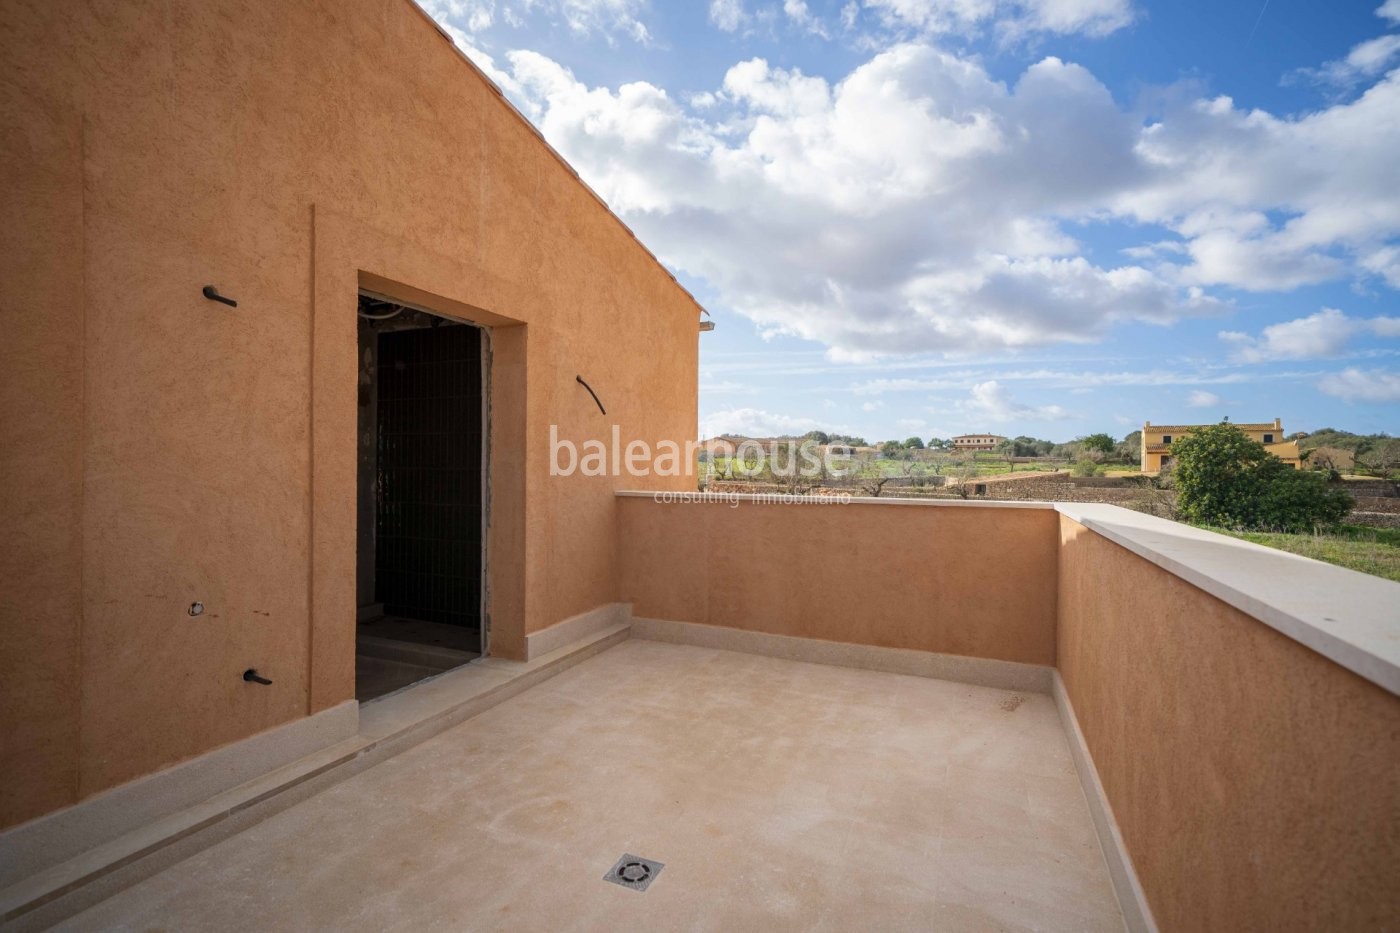 Large newly built finca full of light and comfort close to beaches in Santanyí